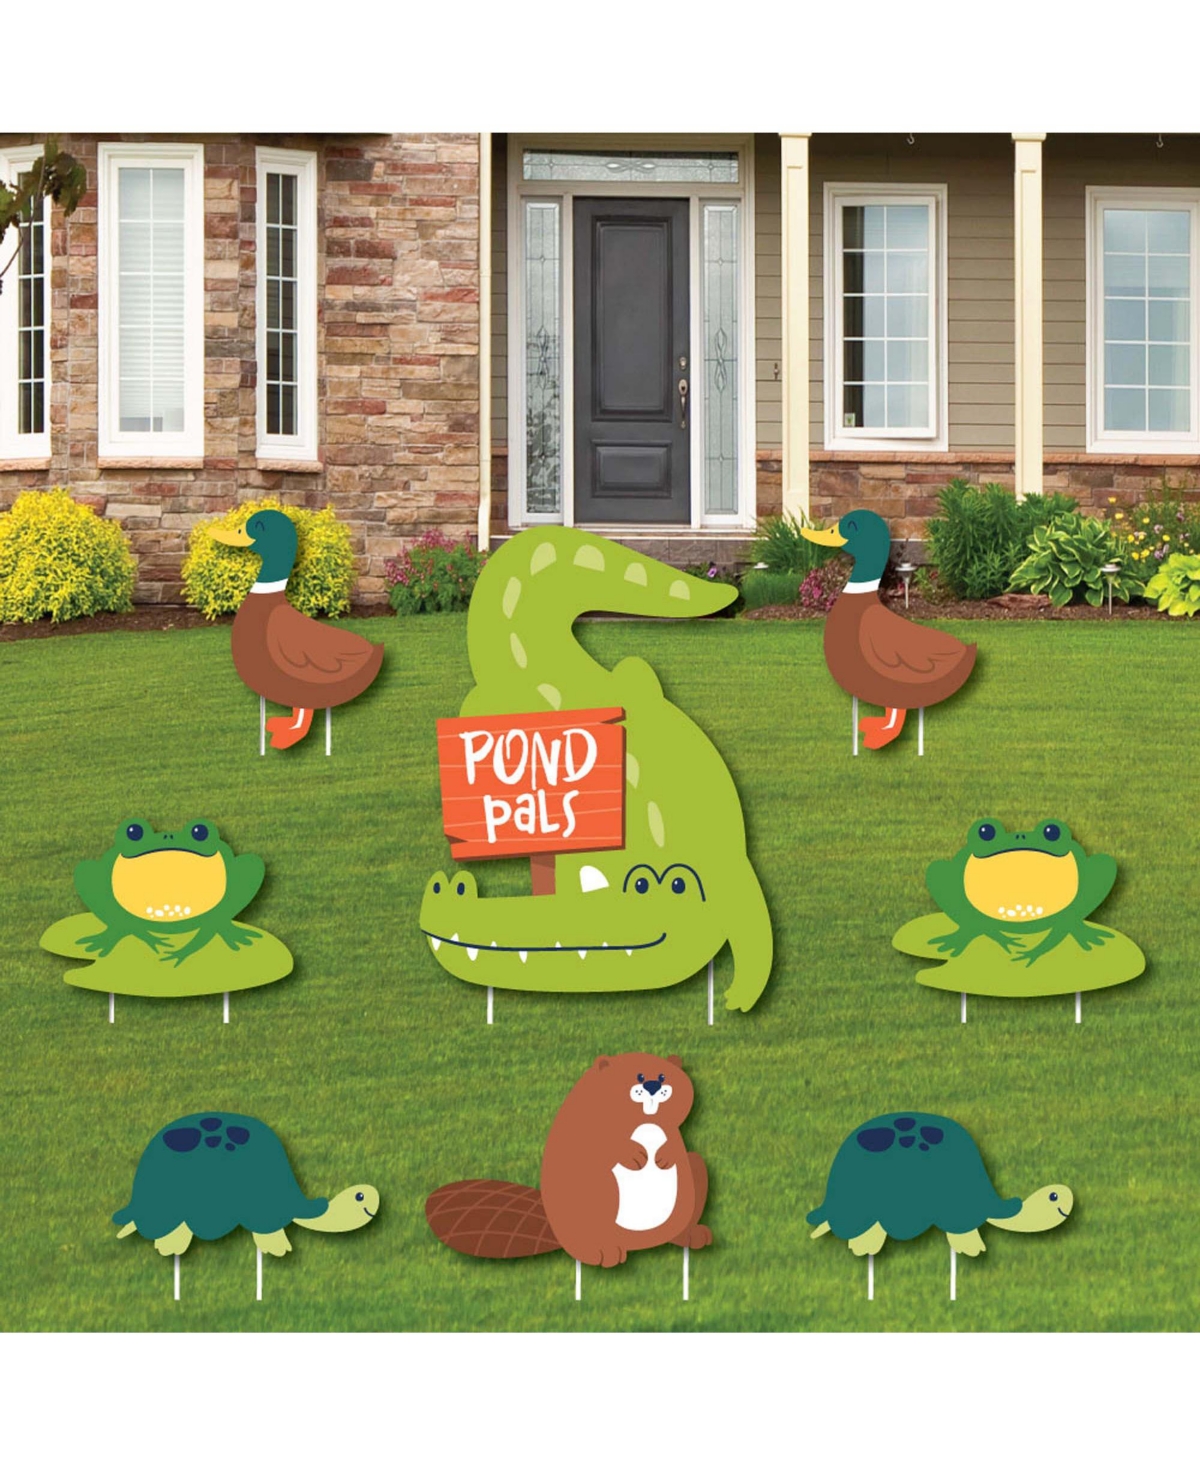 Pond Pals - Outdoor Lawn Decor - Birthday or Baby Shower Yard Signs - Set of 8